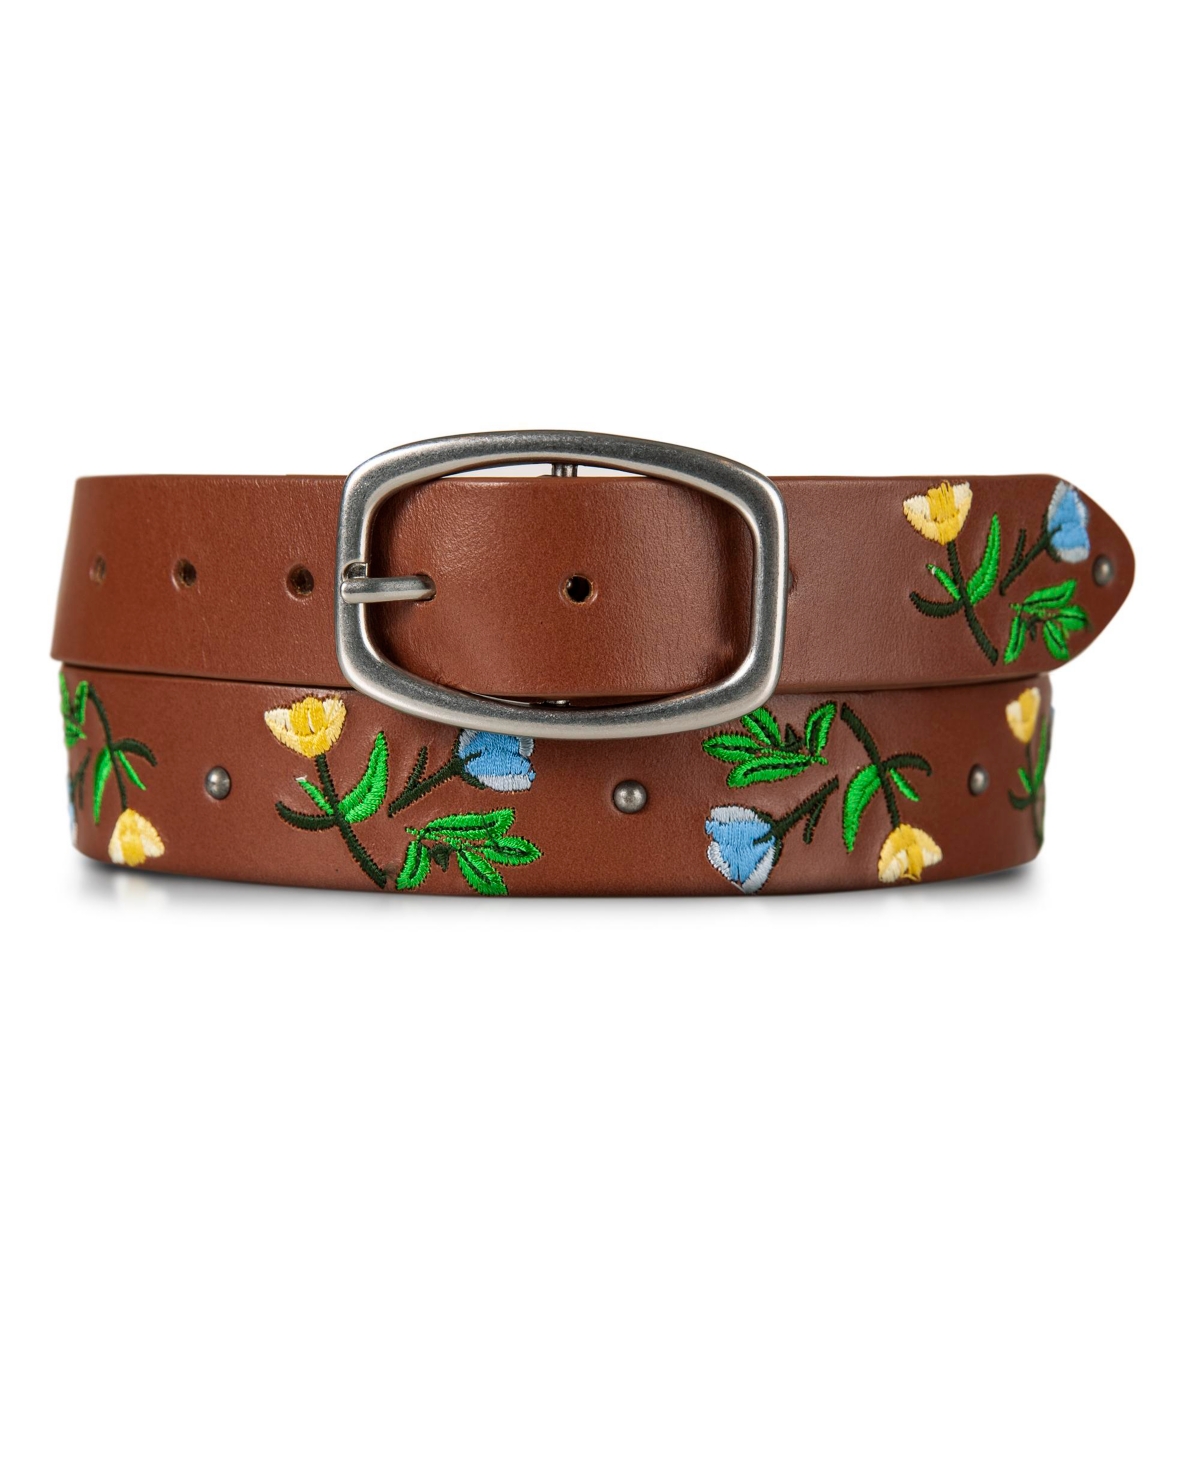 Embroidered Floral Leather Belt - Tan